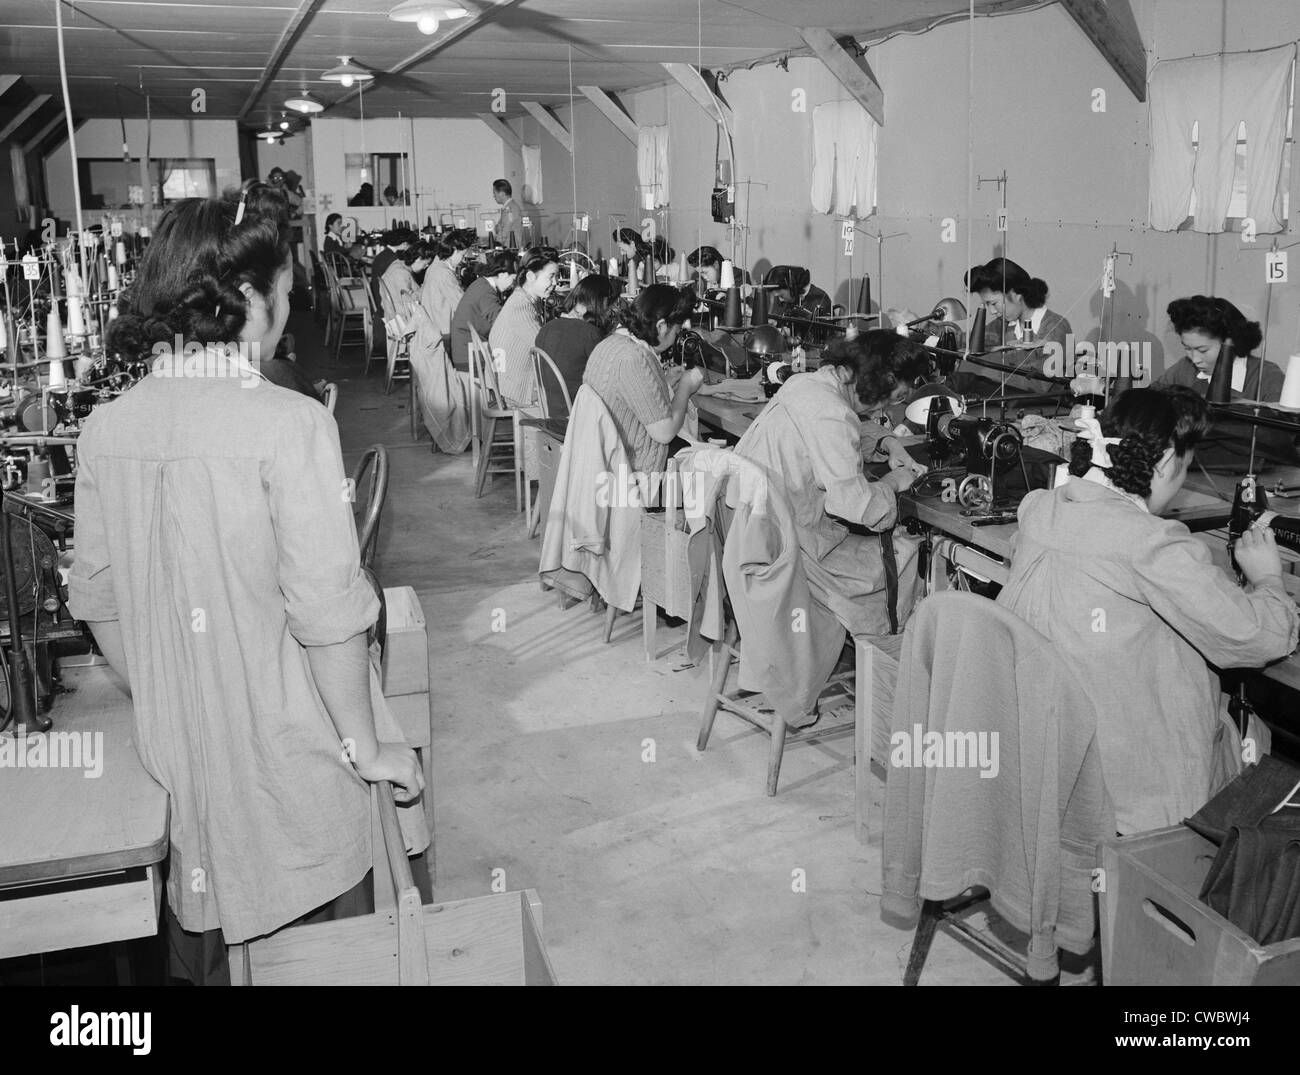 Interned Japanese American, Sumiko Shigematsu, standing at left, supervises fellow internees working at sewing machines at Stock Photo